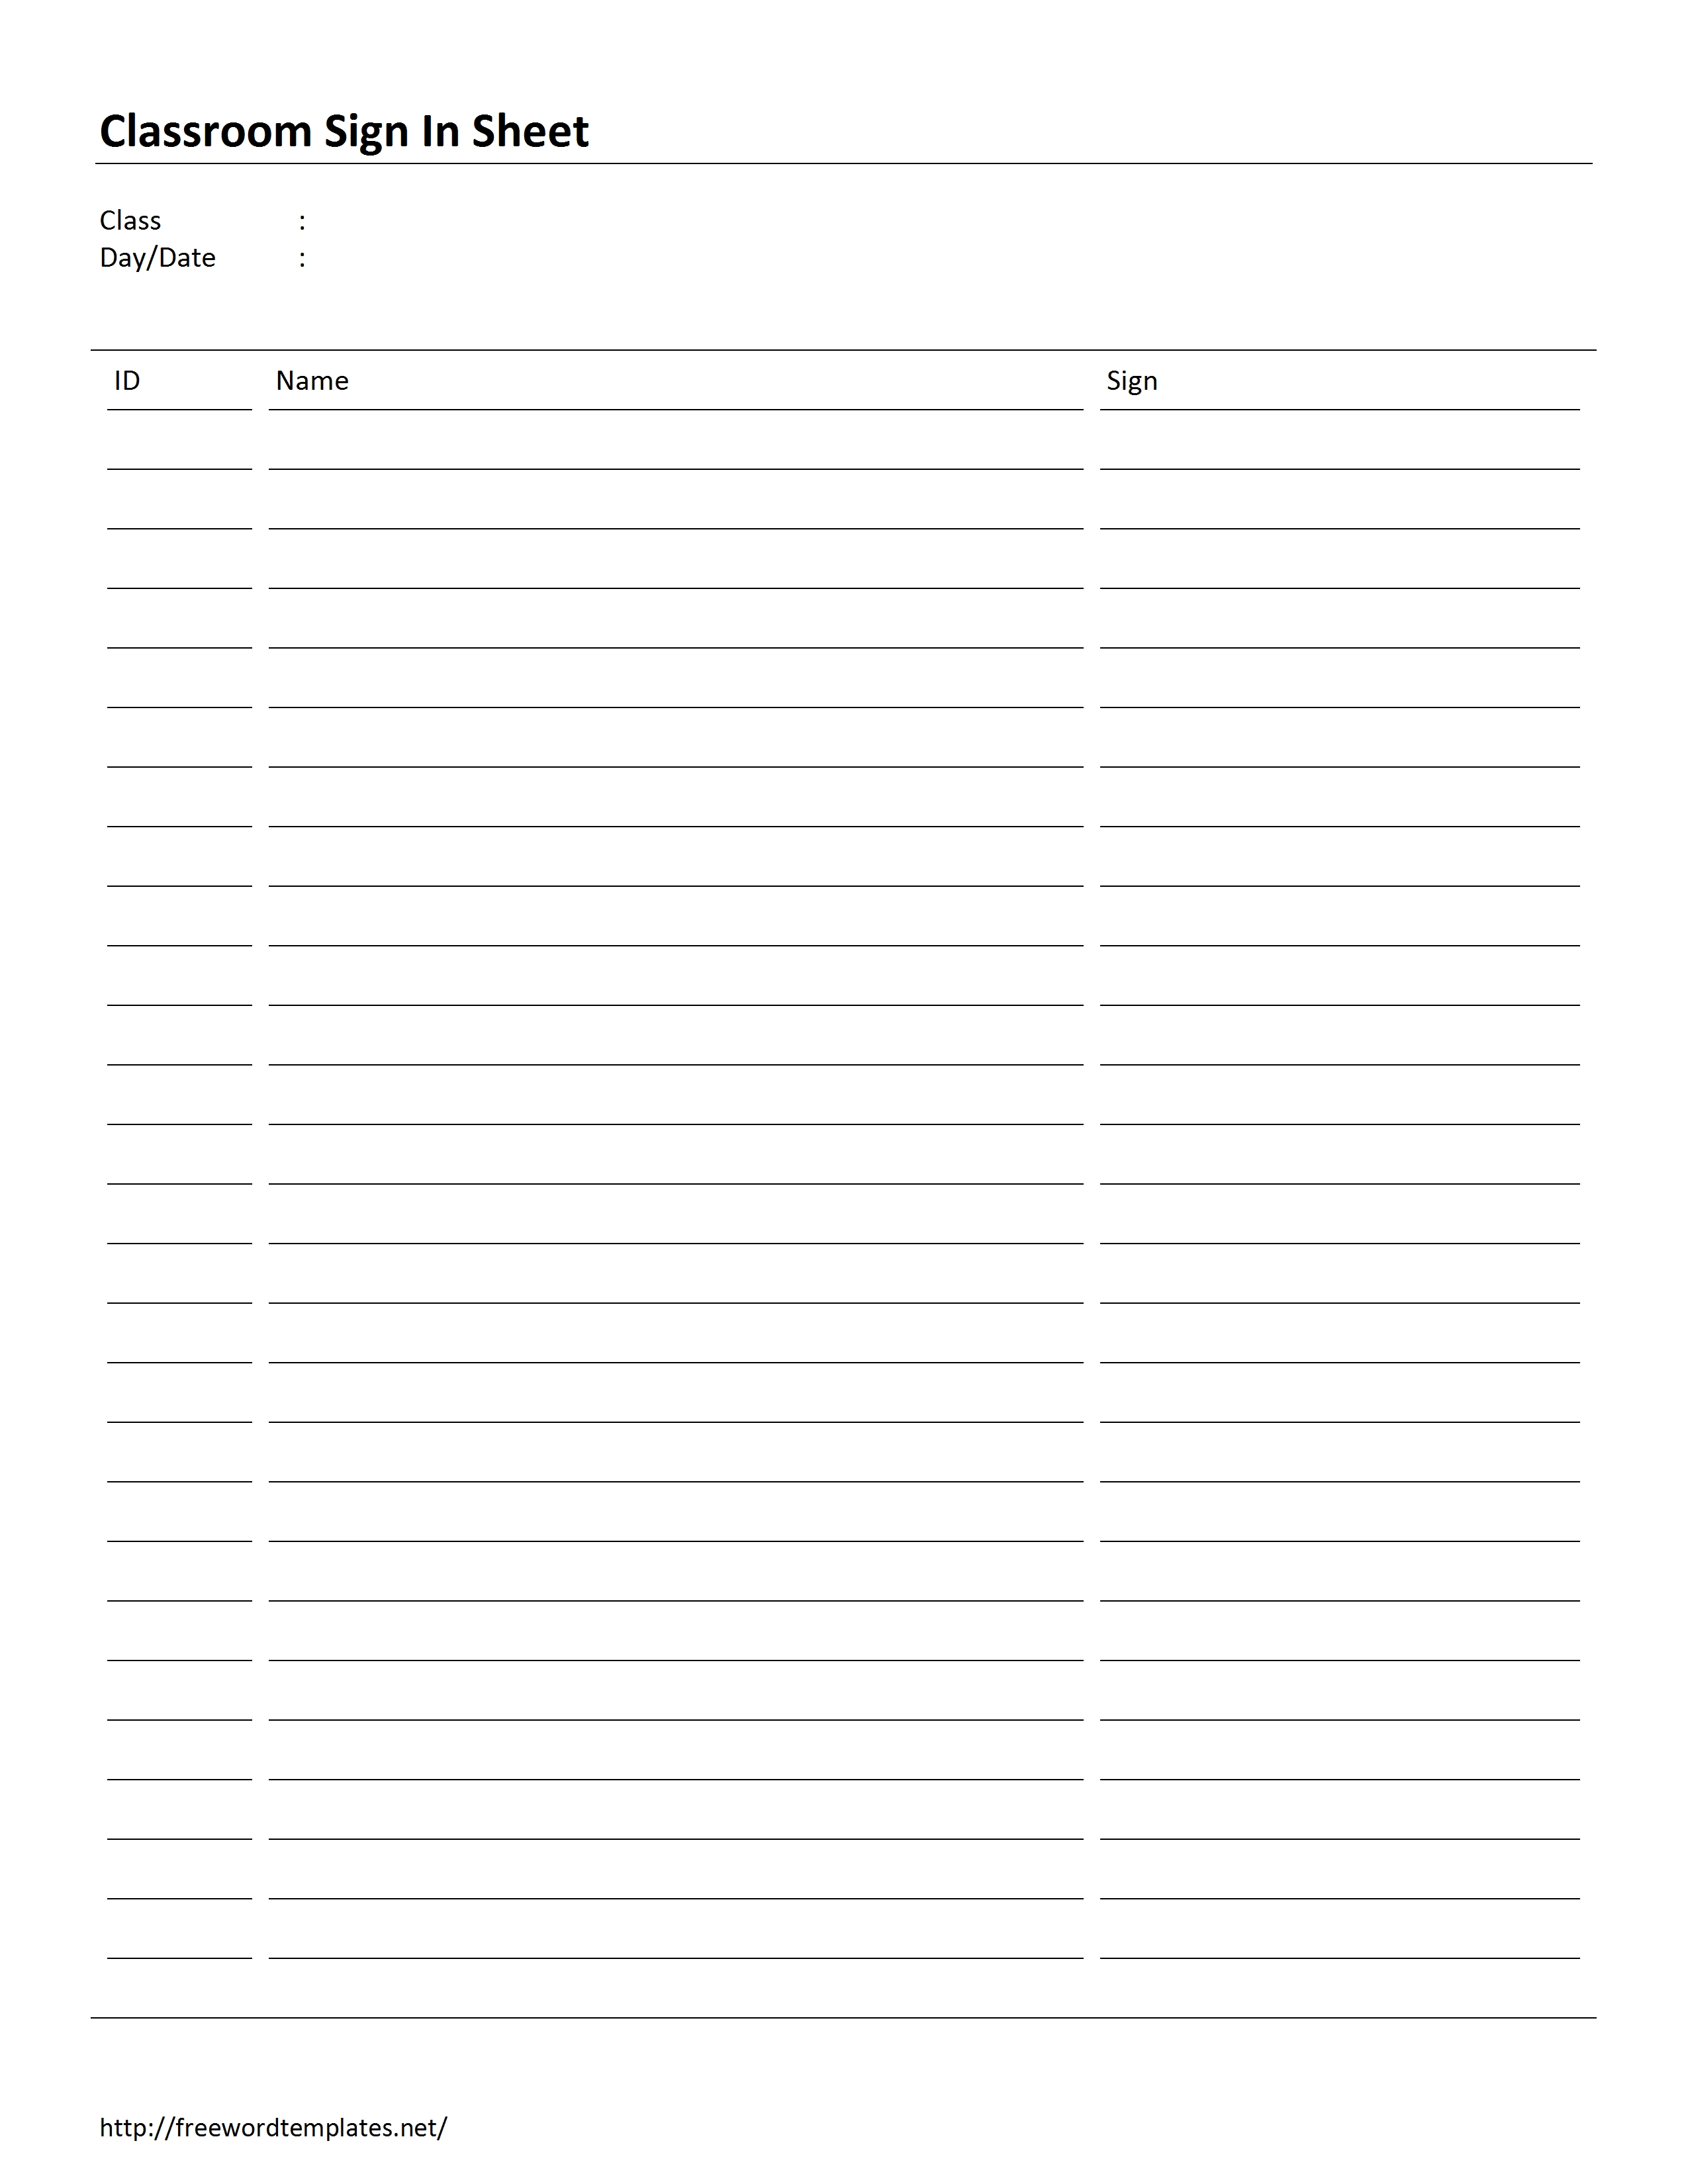 classroom-sign-in-sheet-template